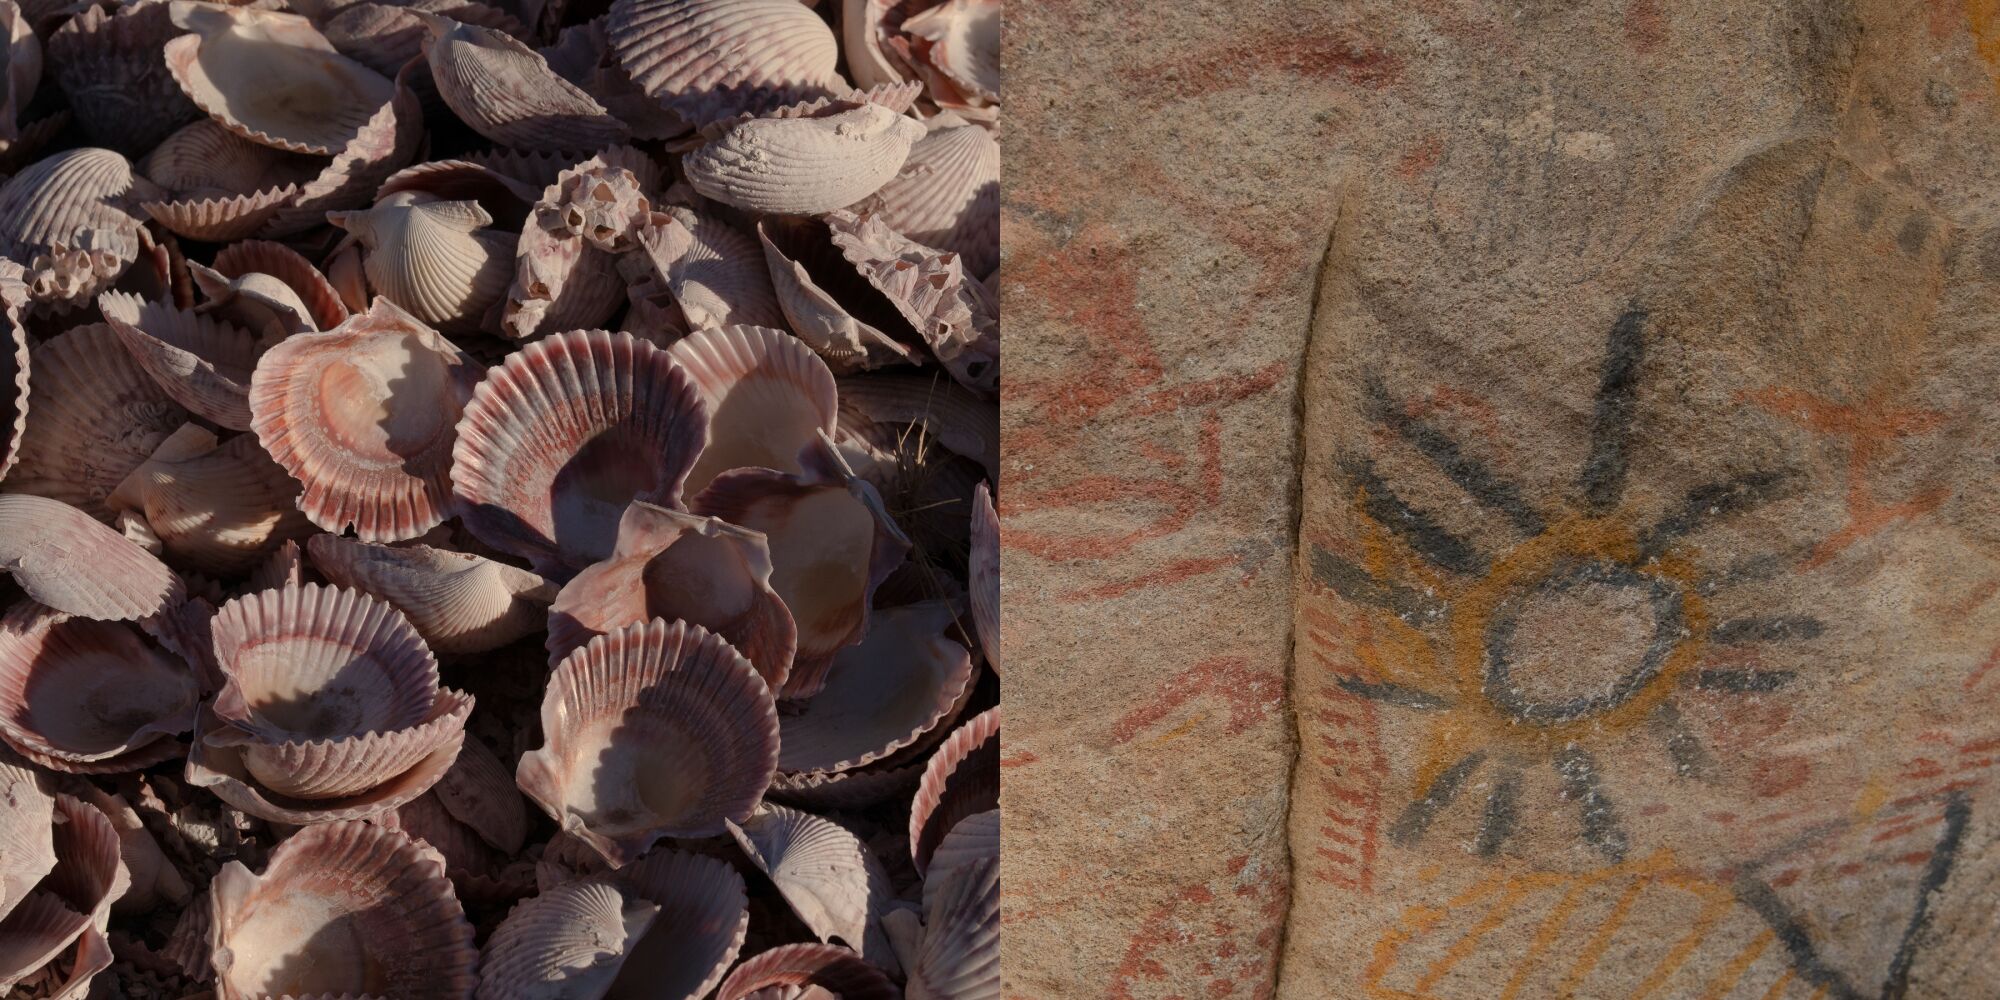 Two photos side by side showing a close up of many scallop shells, left, and ancient drawings on a cave wall, right.